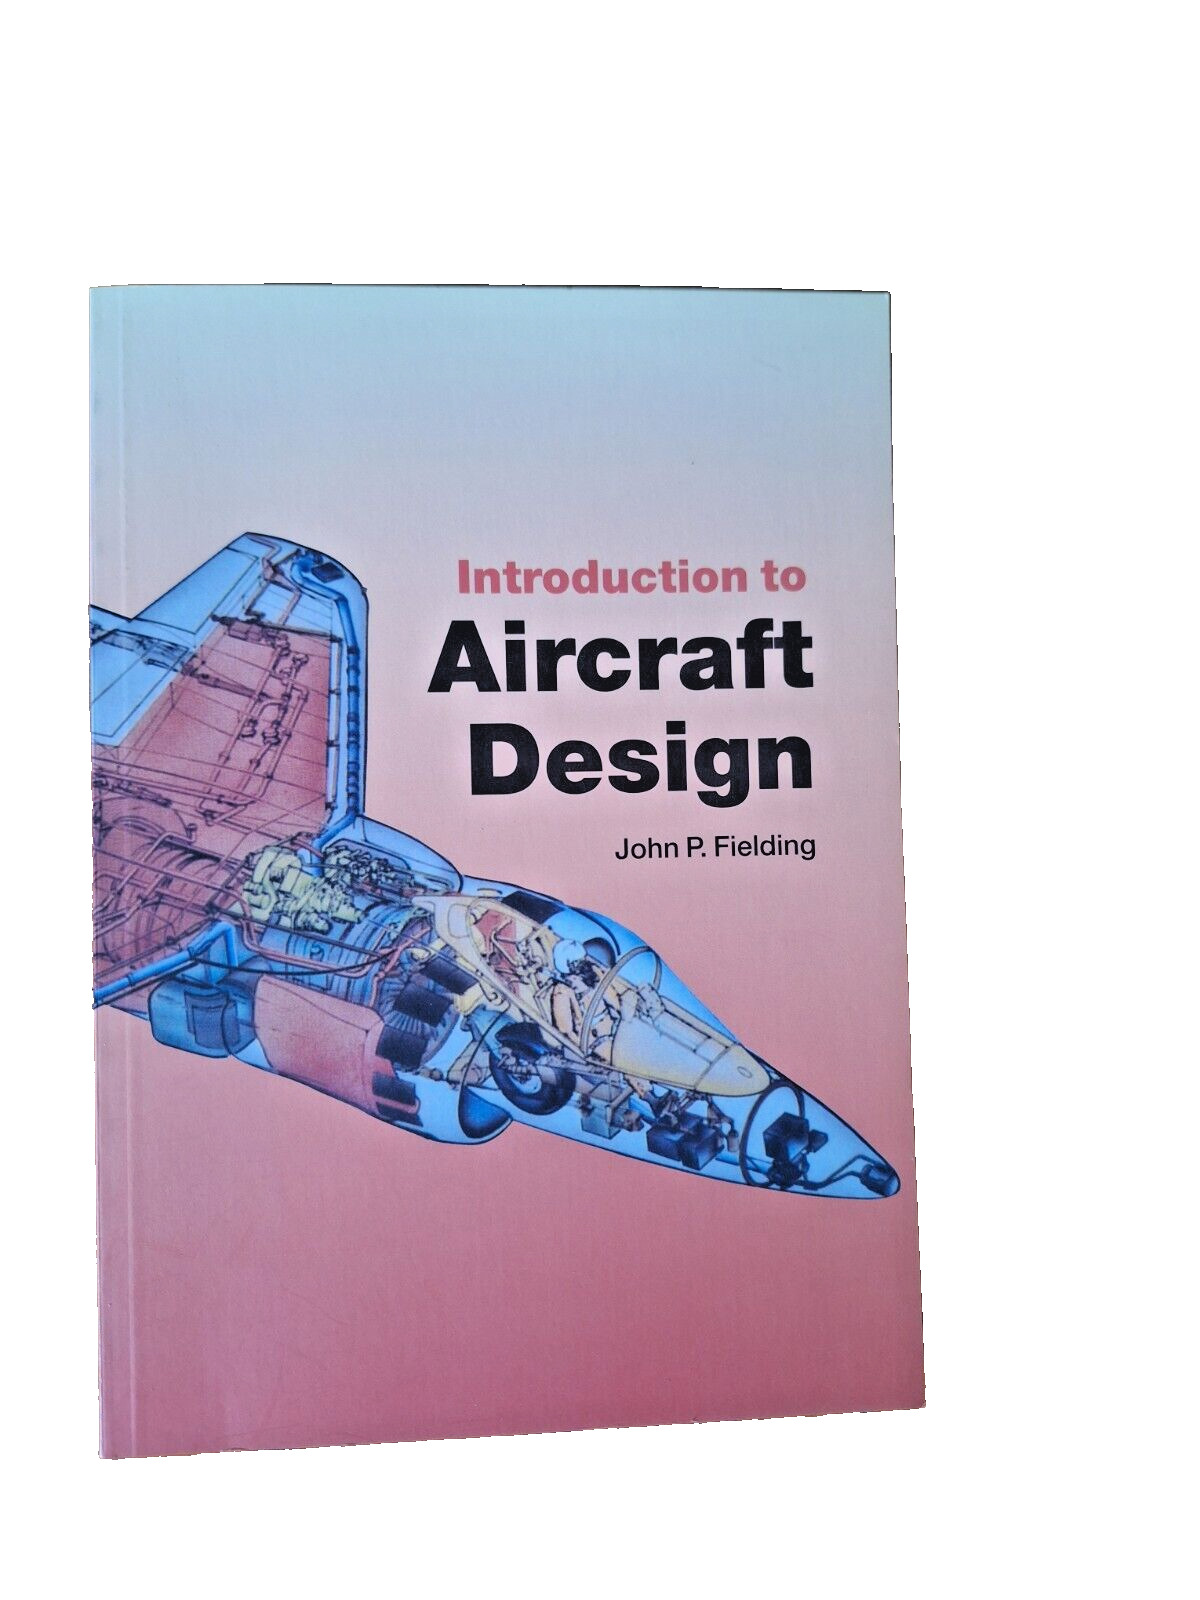 Introduction to Aircraft Design by John P. Fielding. Softback. 2005.